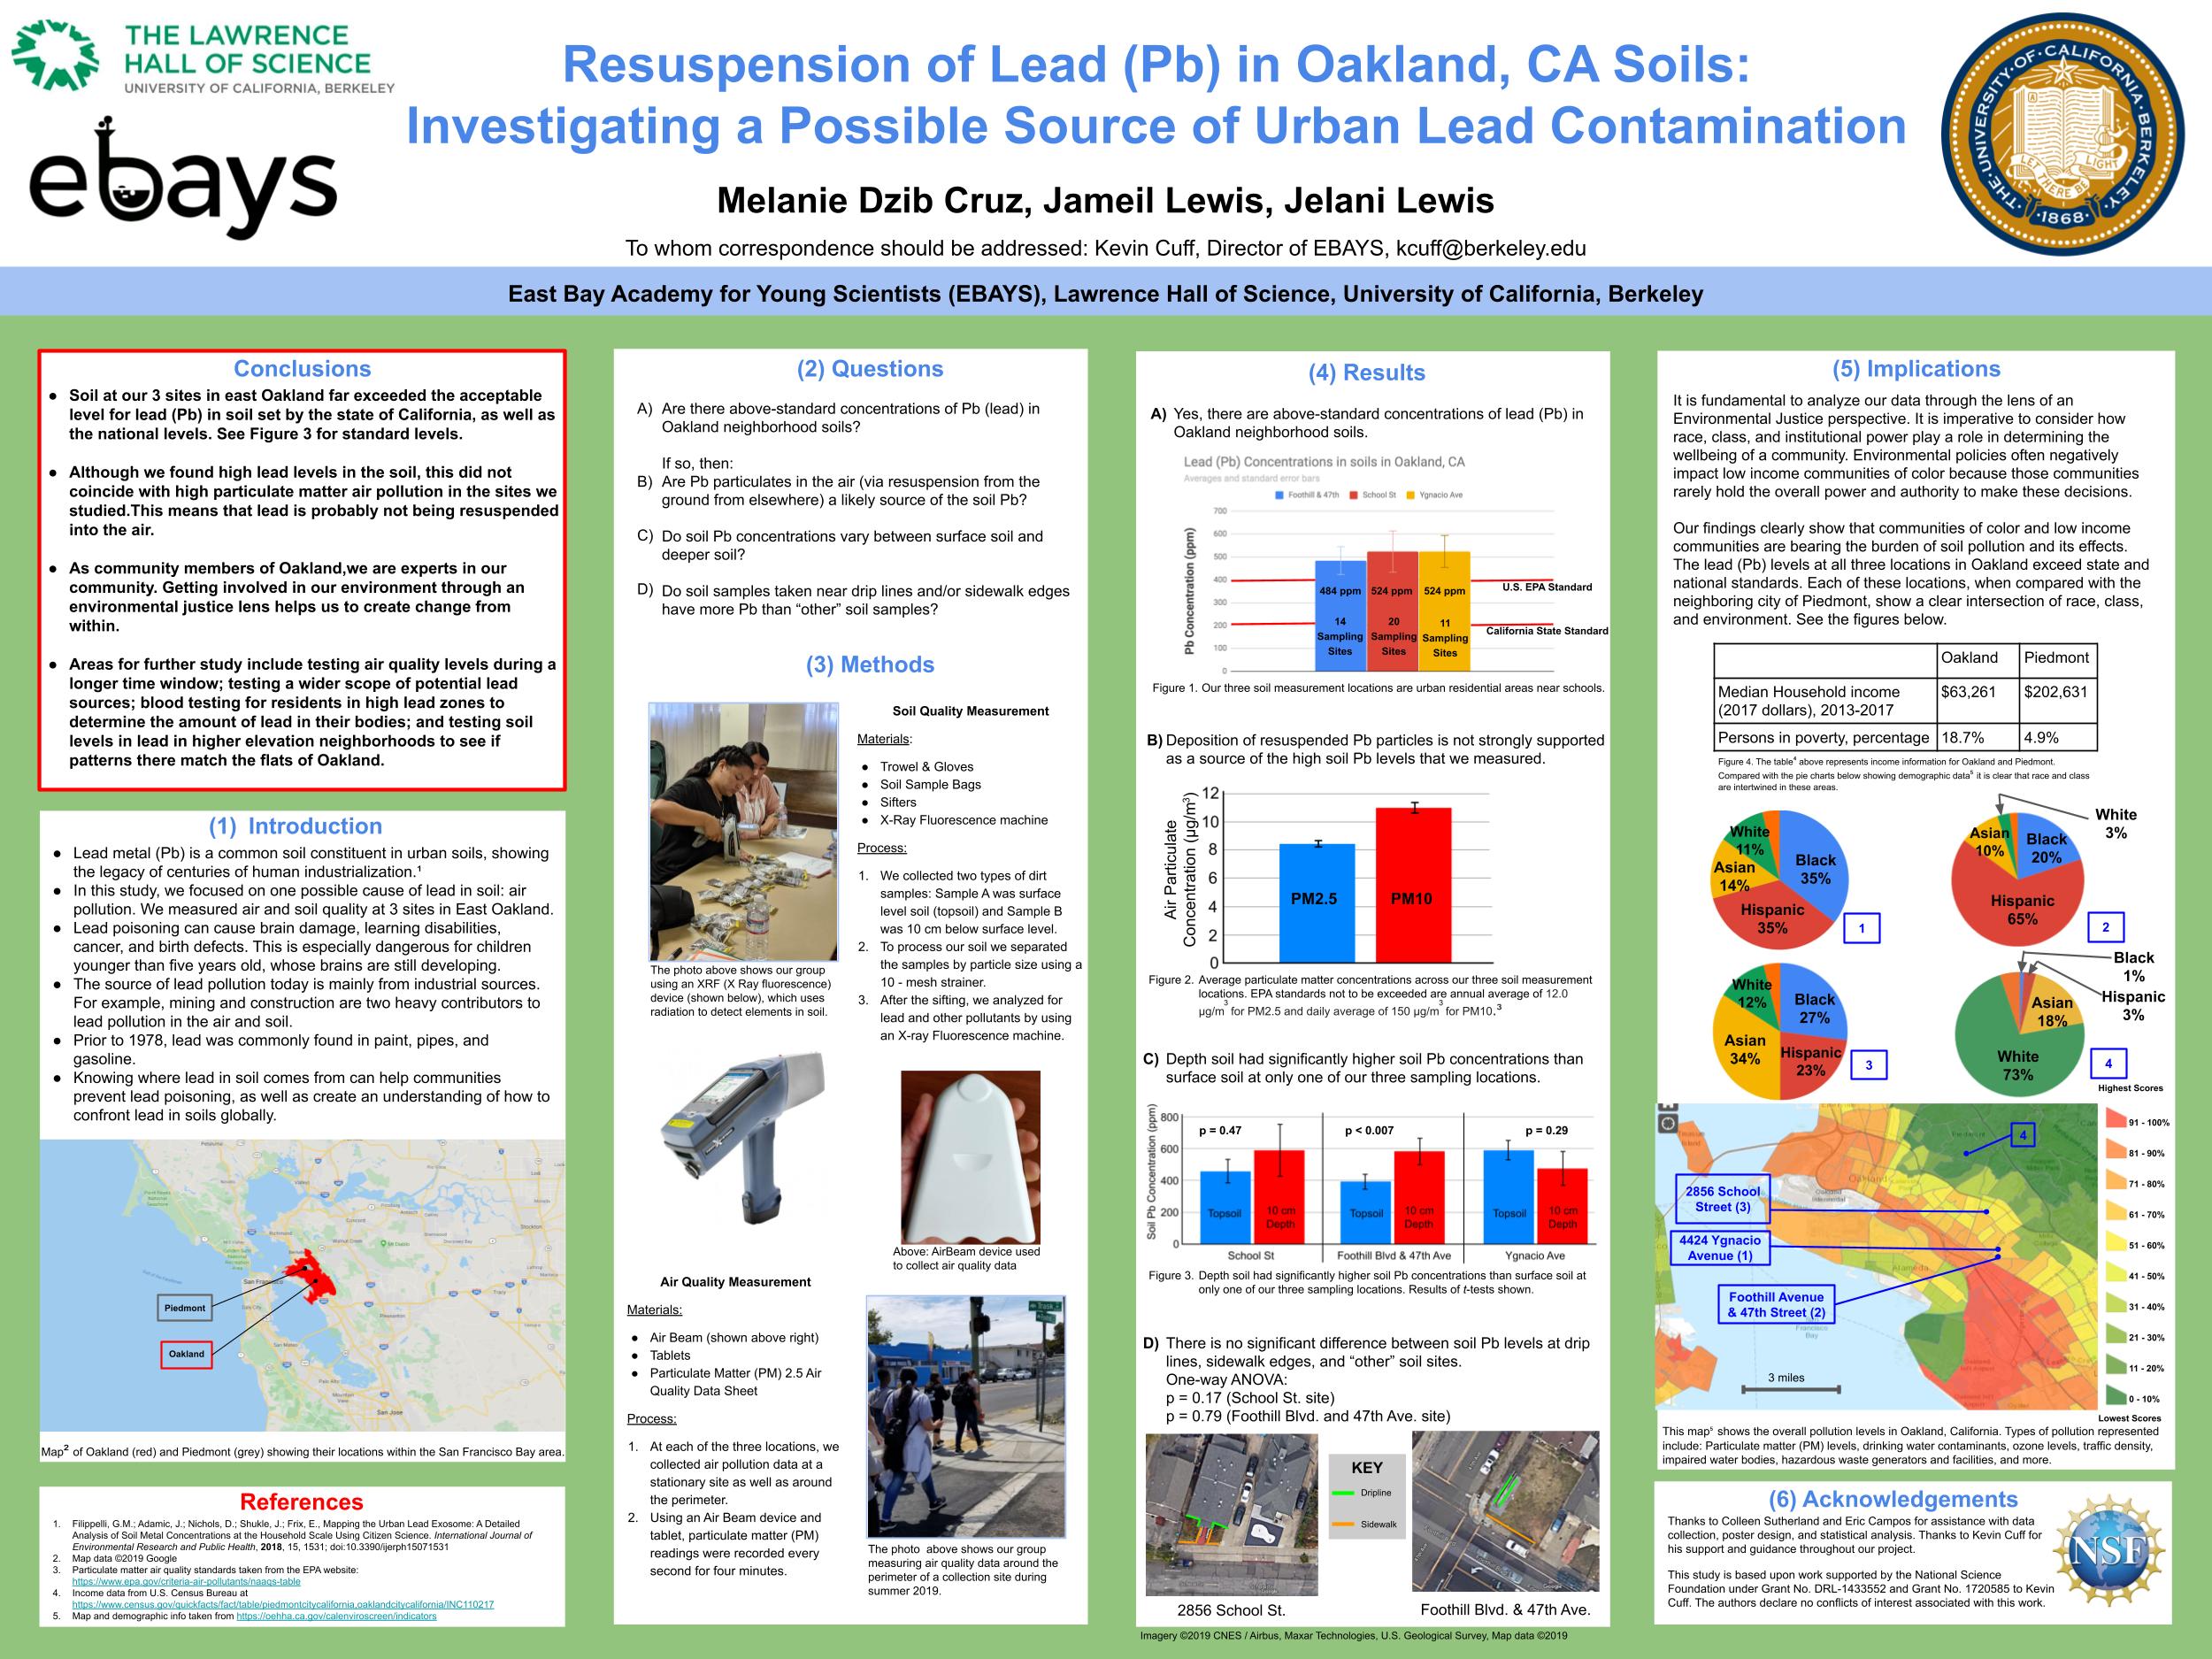 Student created poster for the 2019 American Geophysical Union conference. Subject is: Resuspension of lead (Pb) in Oakland, CA soils